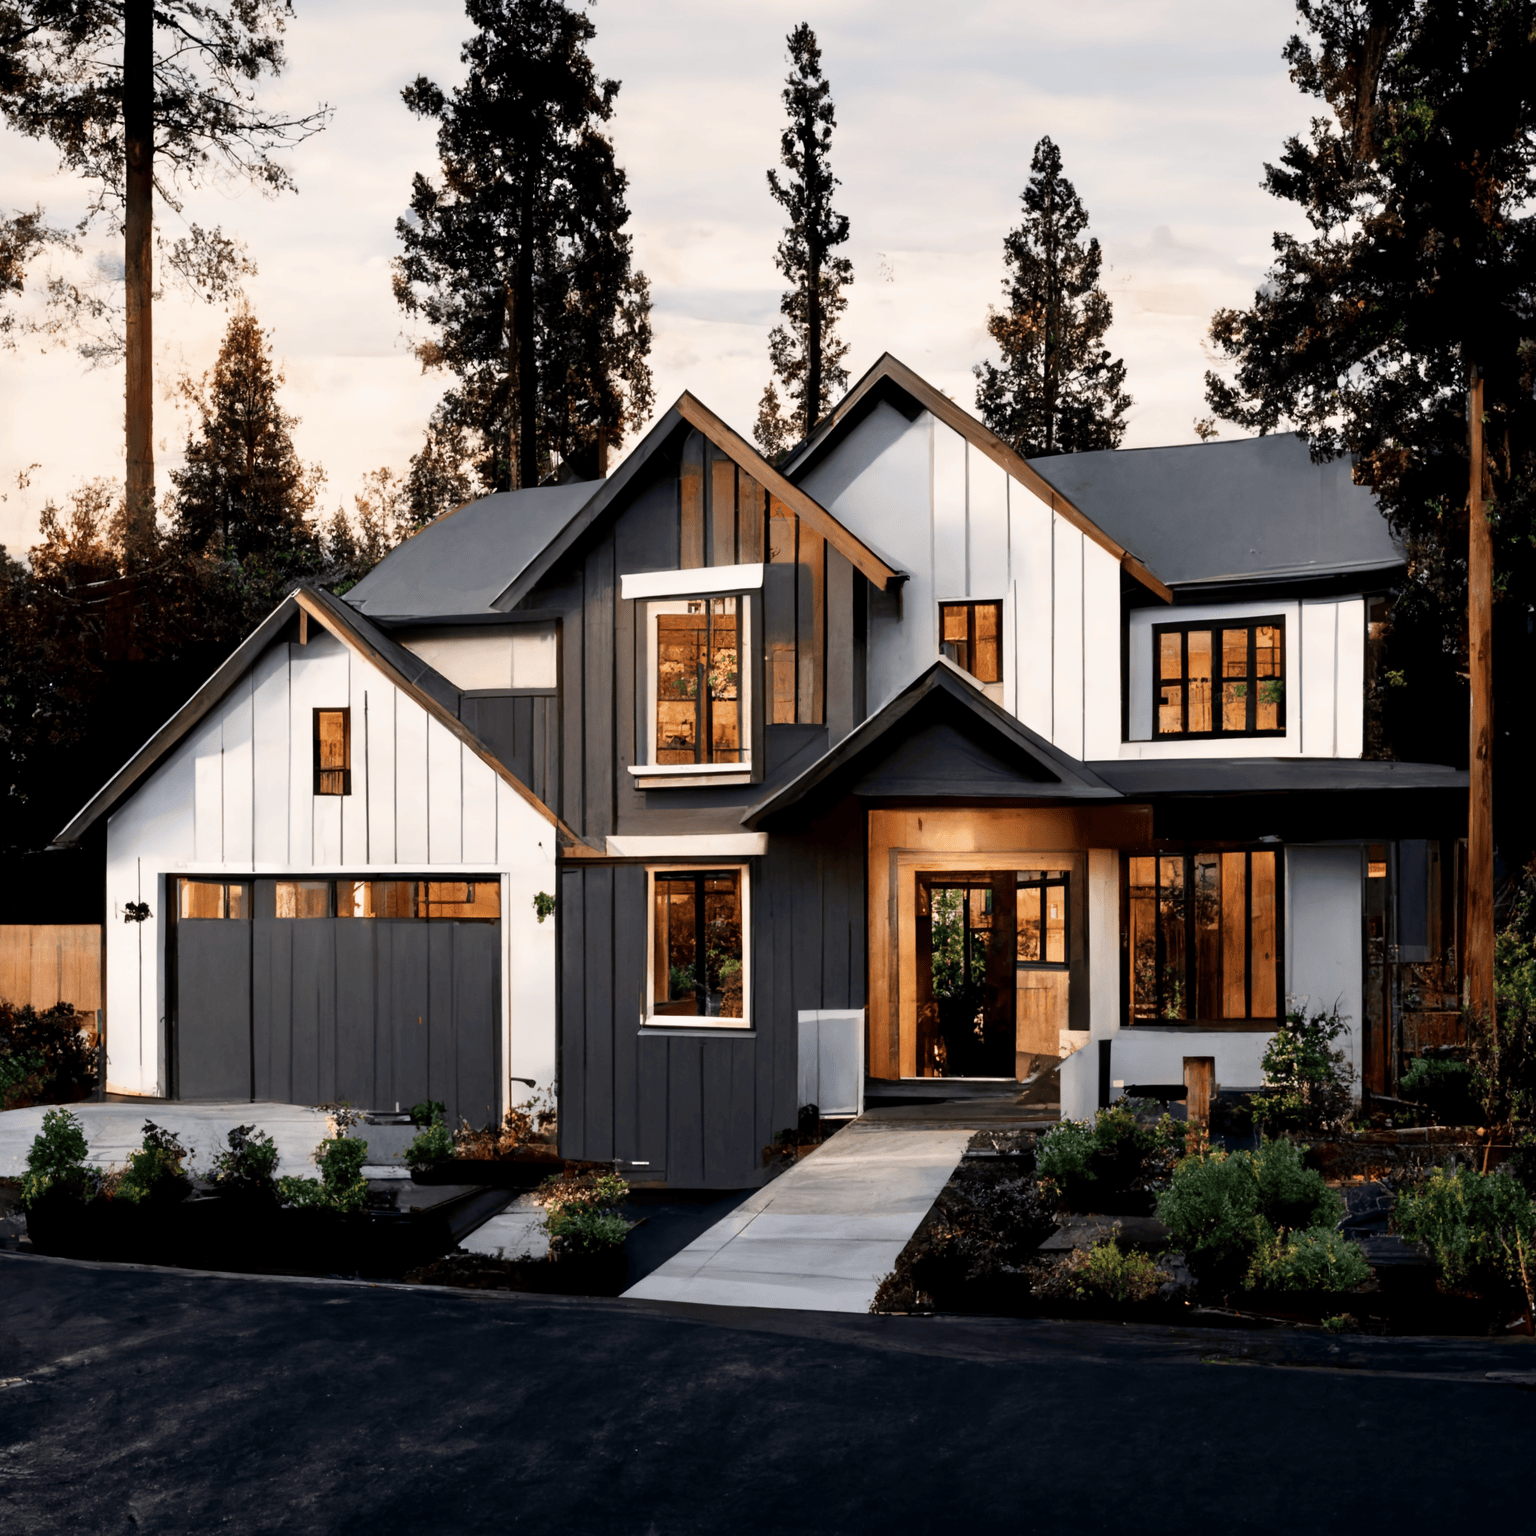 Southern Oregon Real Estate Market: Get a head start on buying a home with this guide on key terms to know. From appraisals to closing costs, learn what you need to know with our expert advice. 